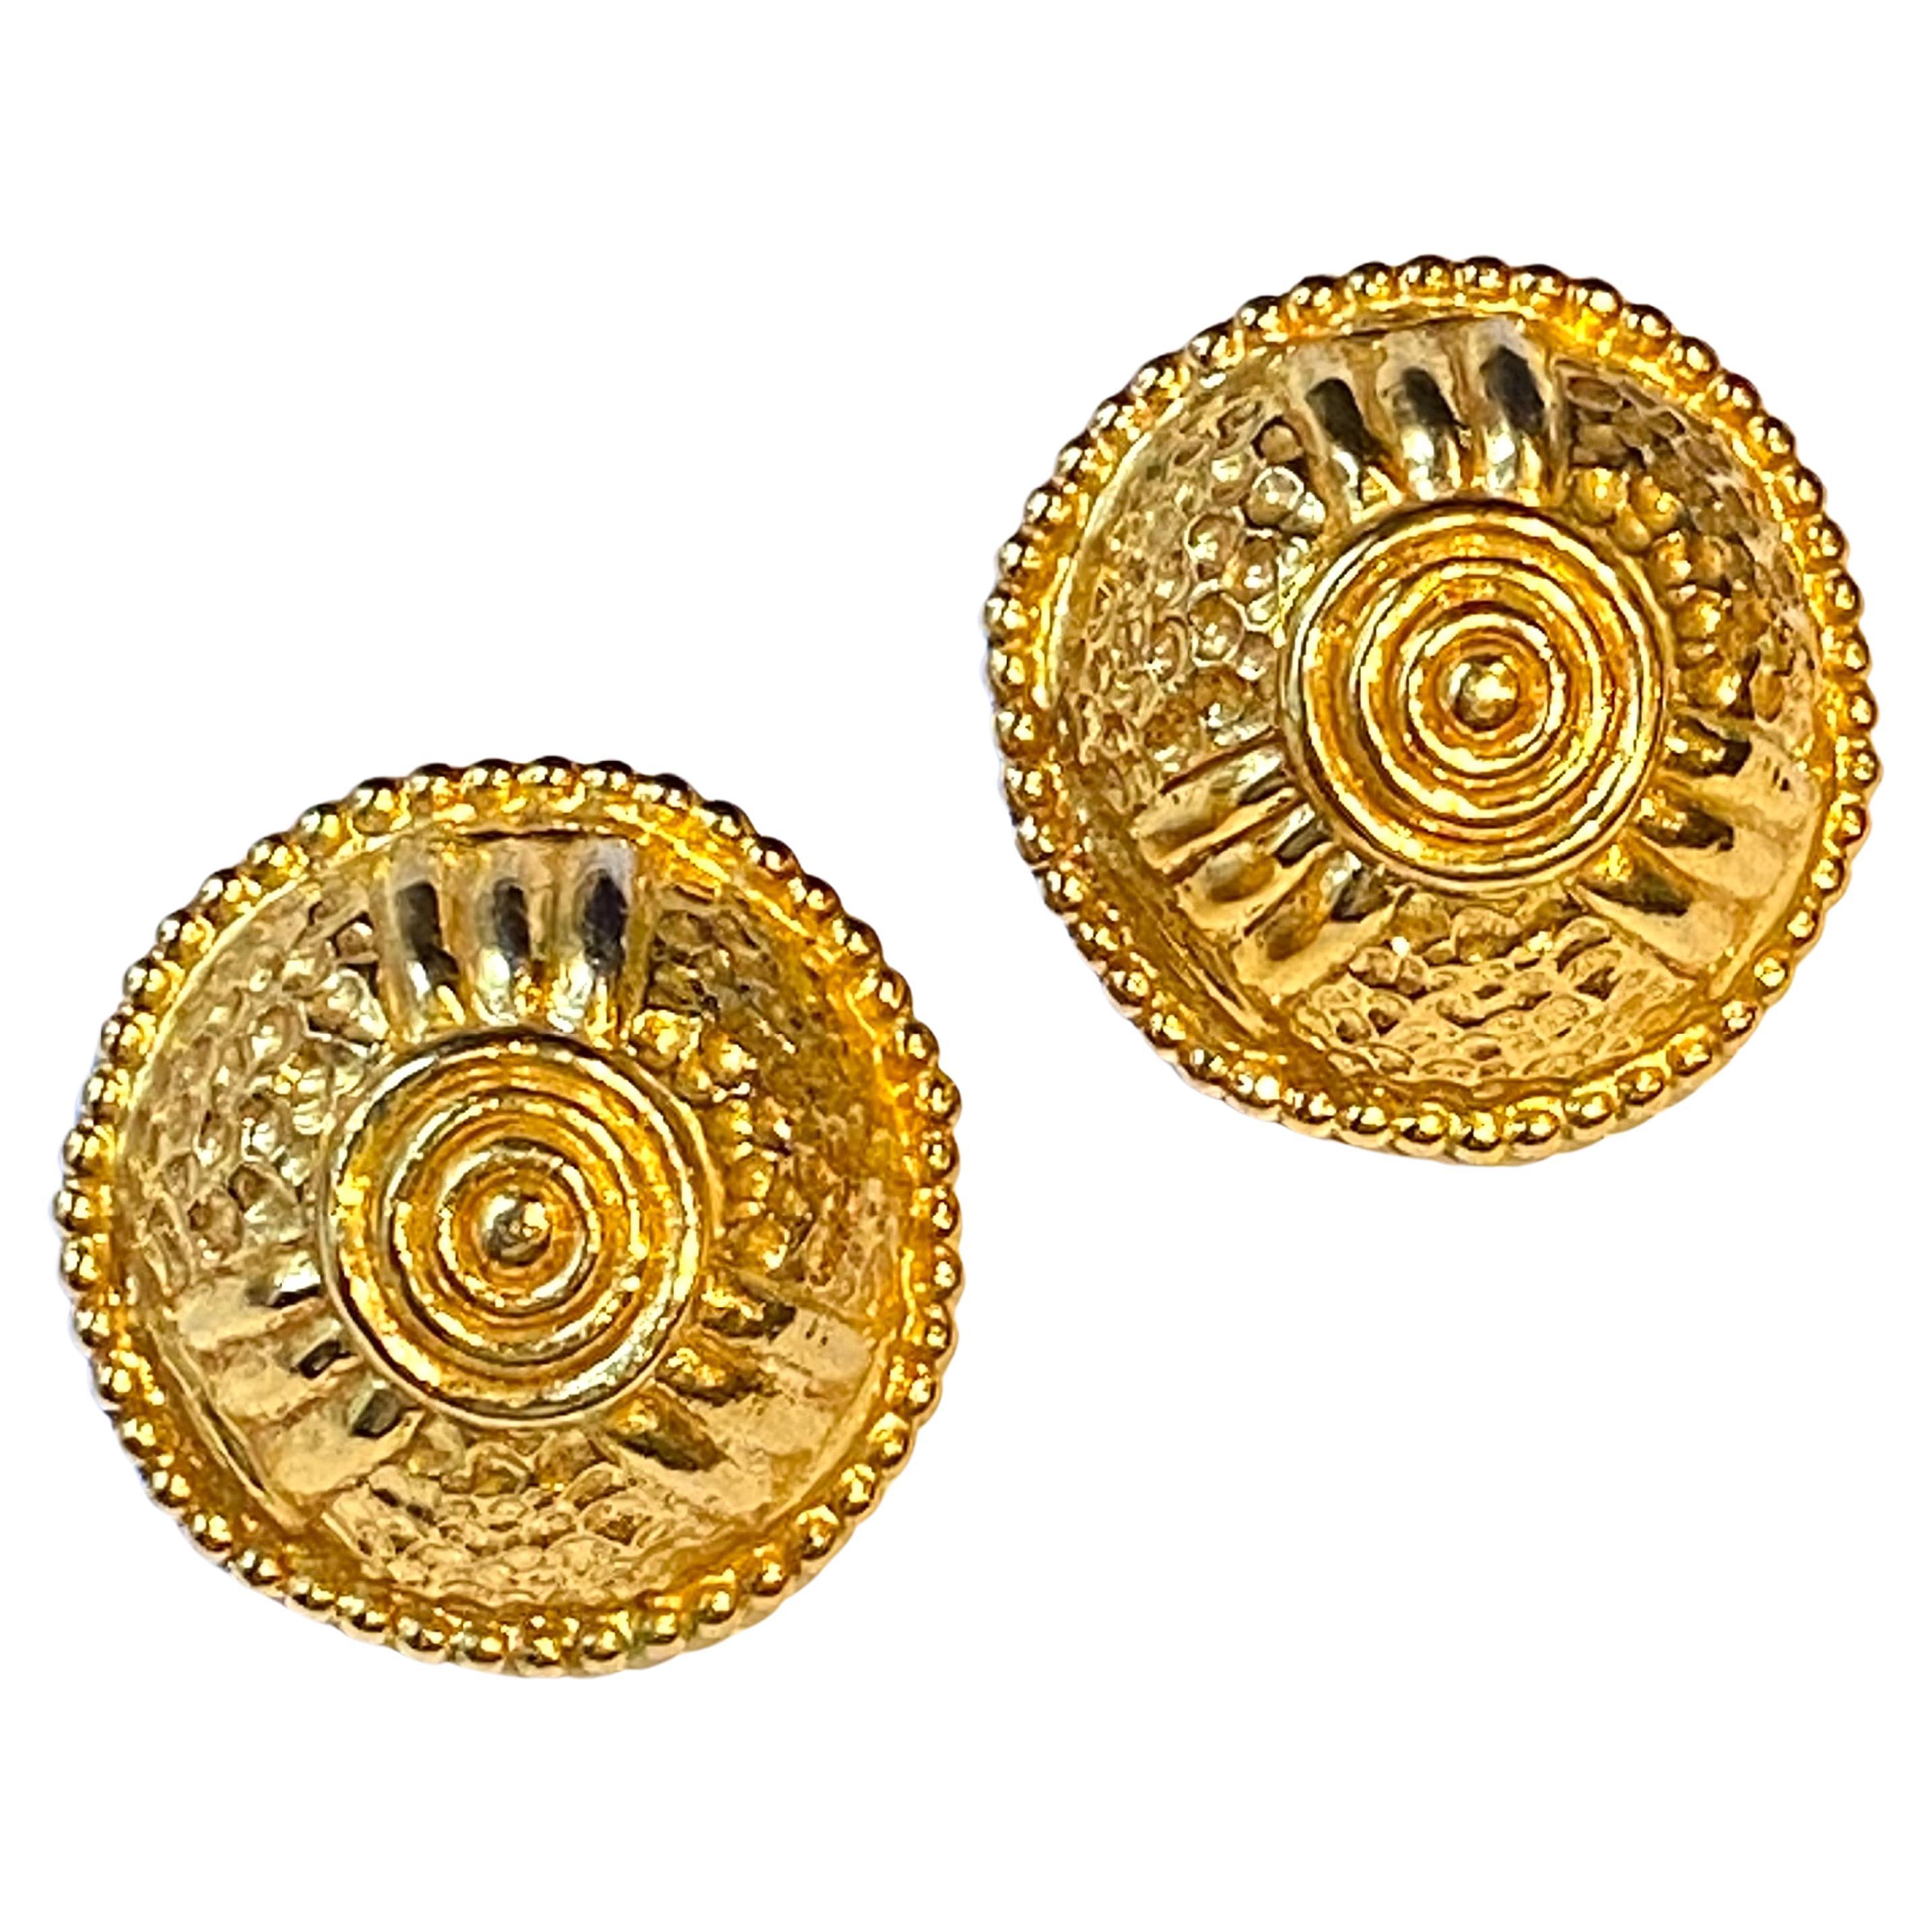 Dominique Aurientis 1980s Large Gold Domed Etruscan Style Button Earrings